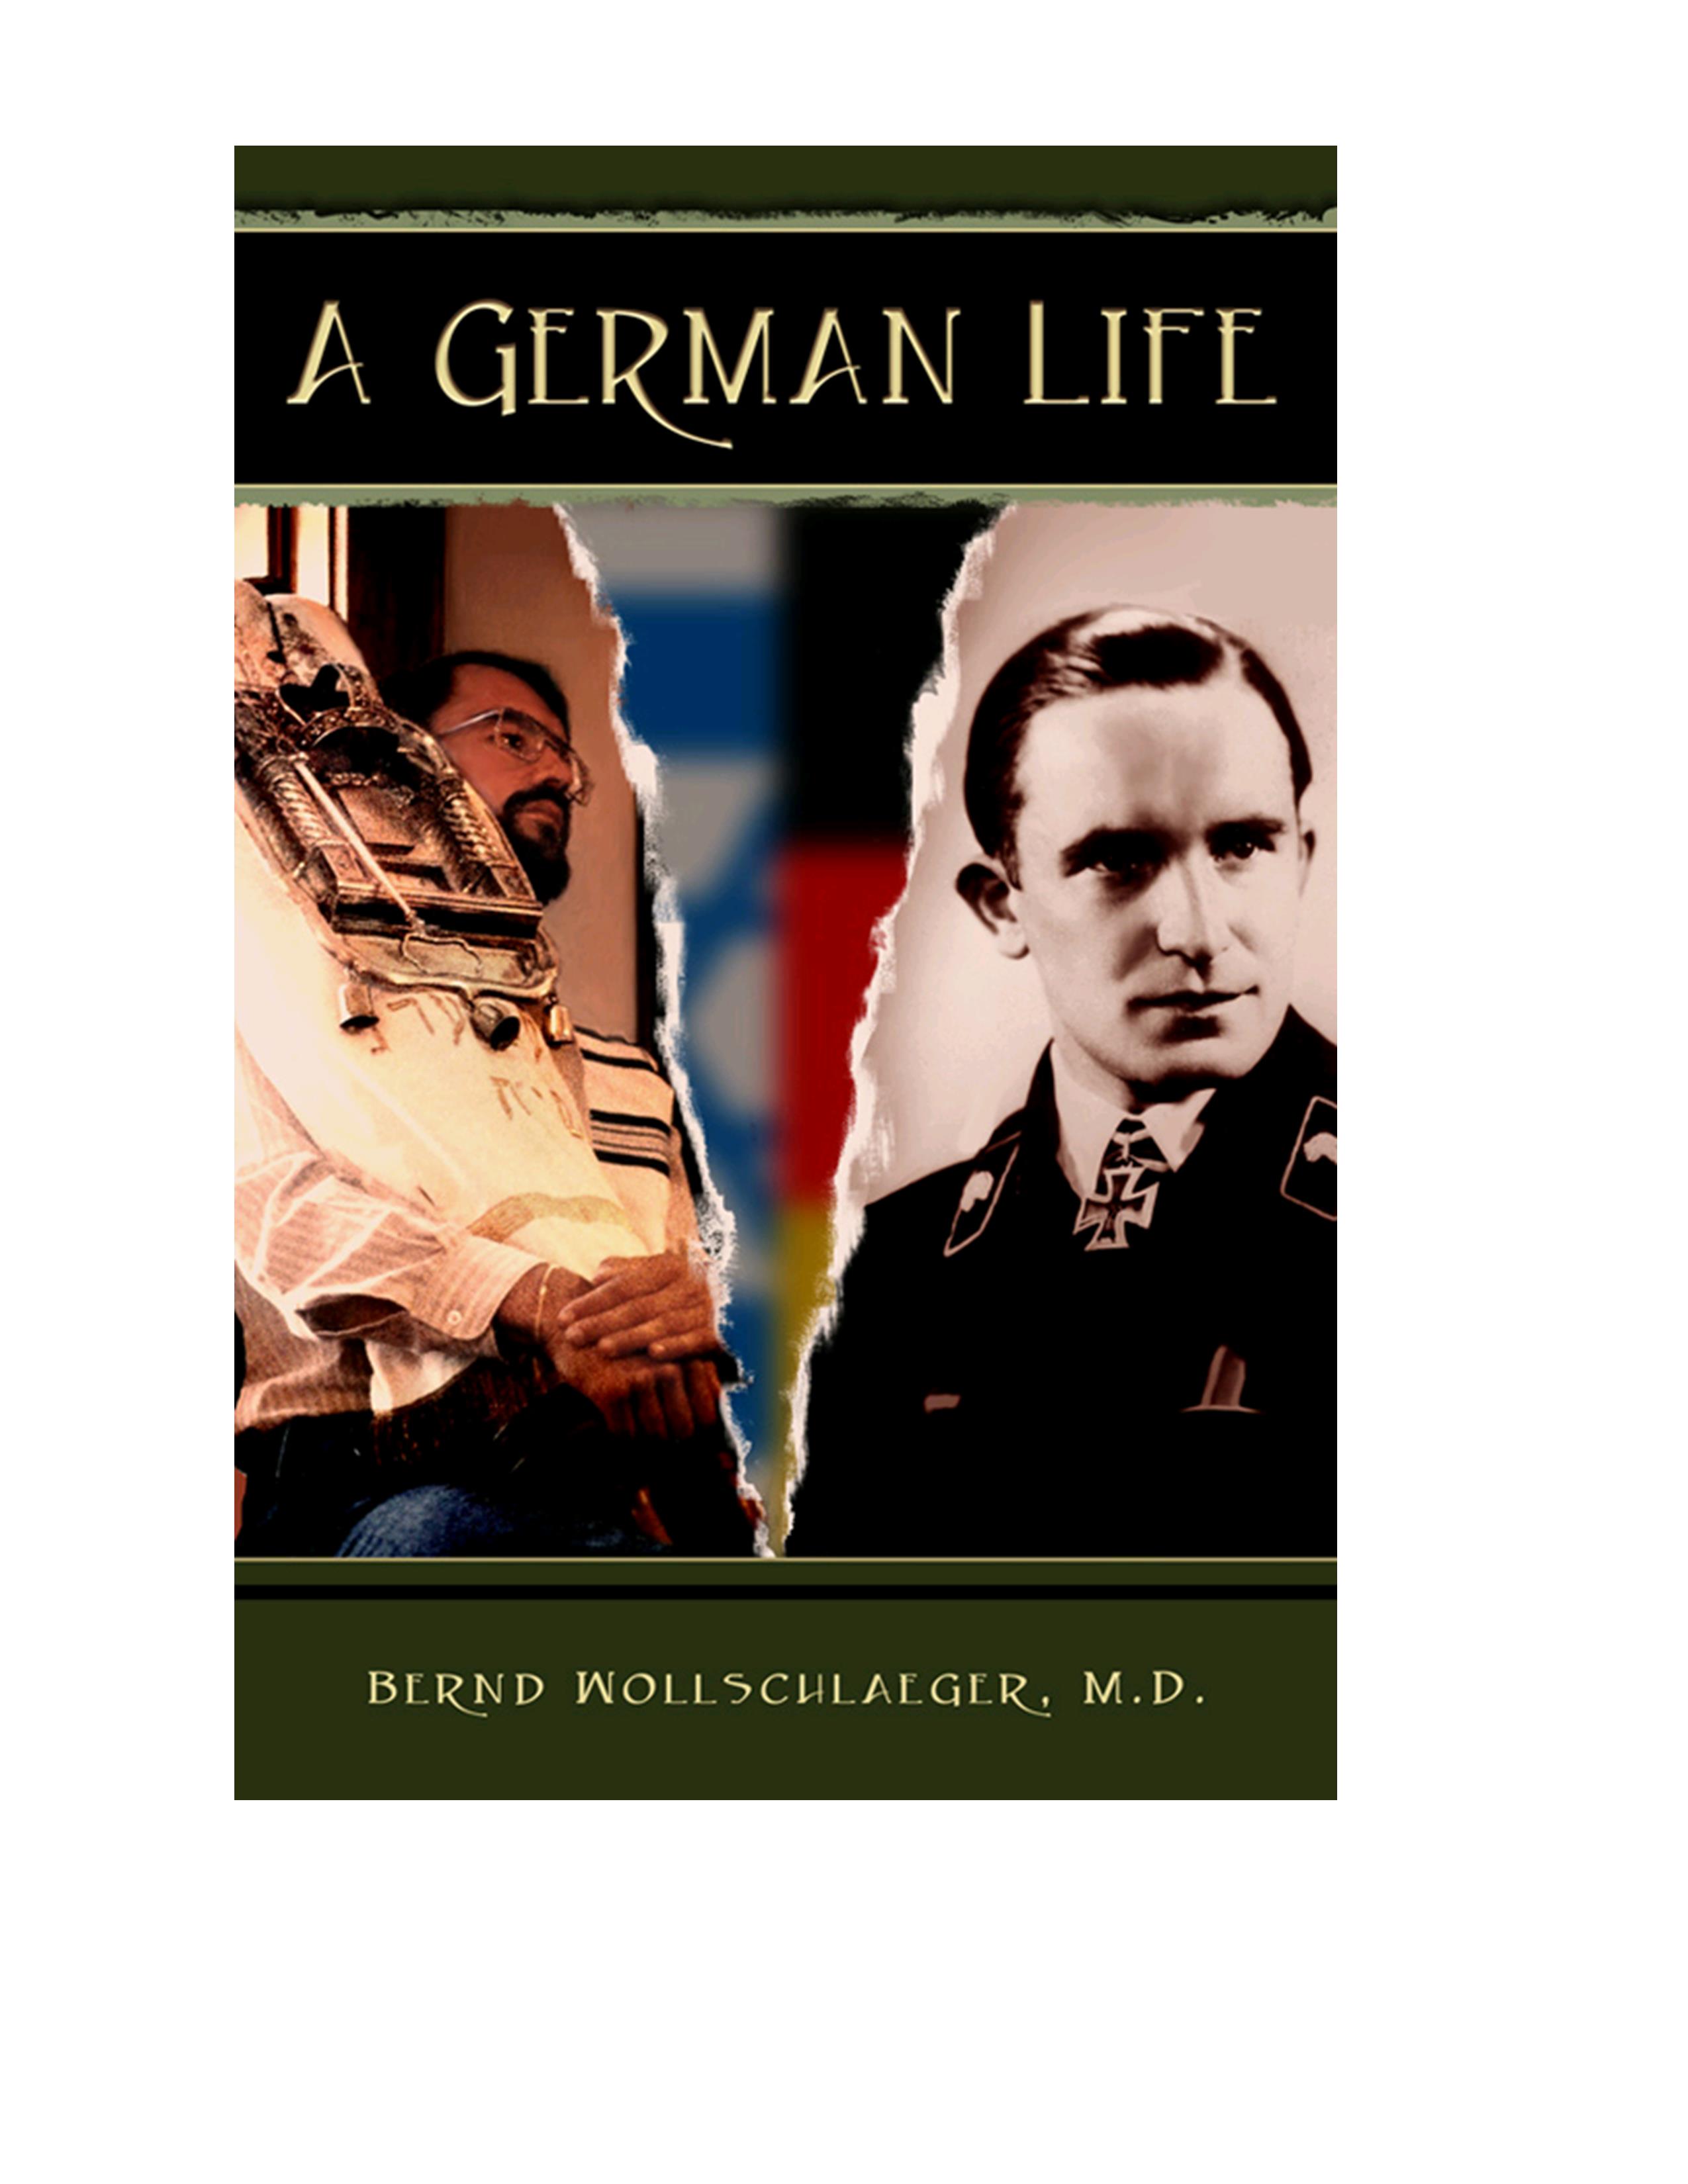  - A-German-Life-book-cover